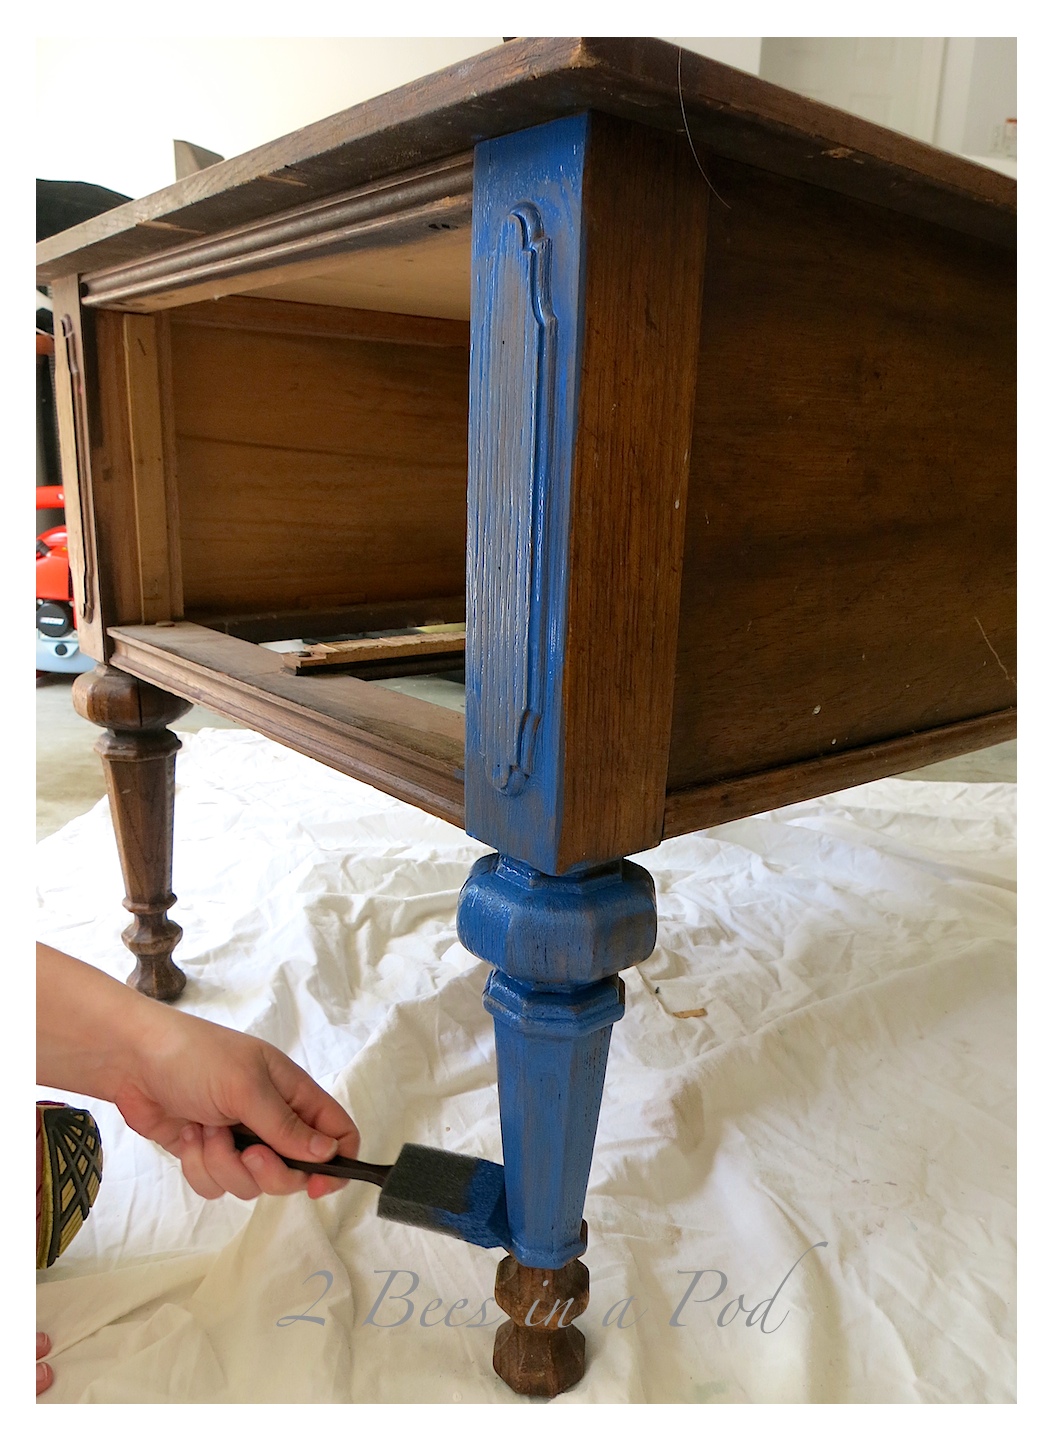 End table gets a makeover - using homemade chalk paint, light distressing and two was treatments. We even shined up the hardware using Brasso.